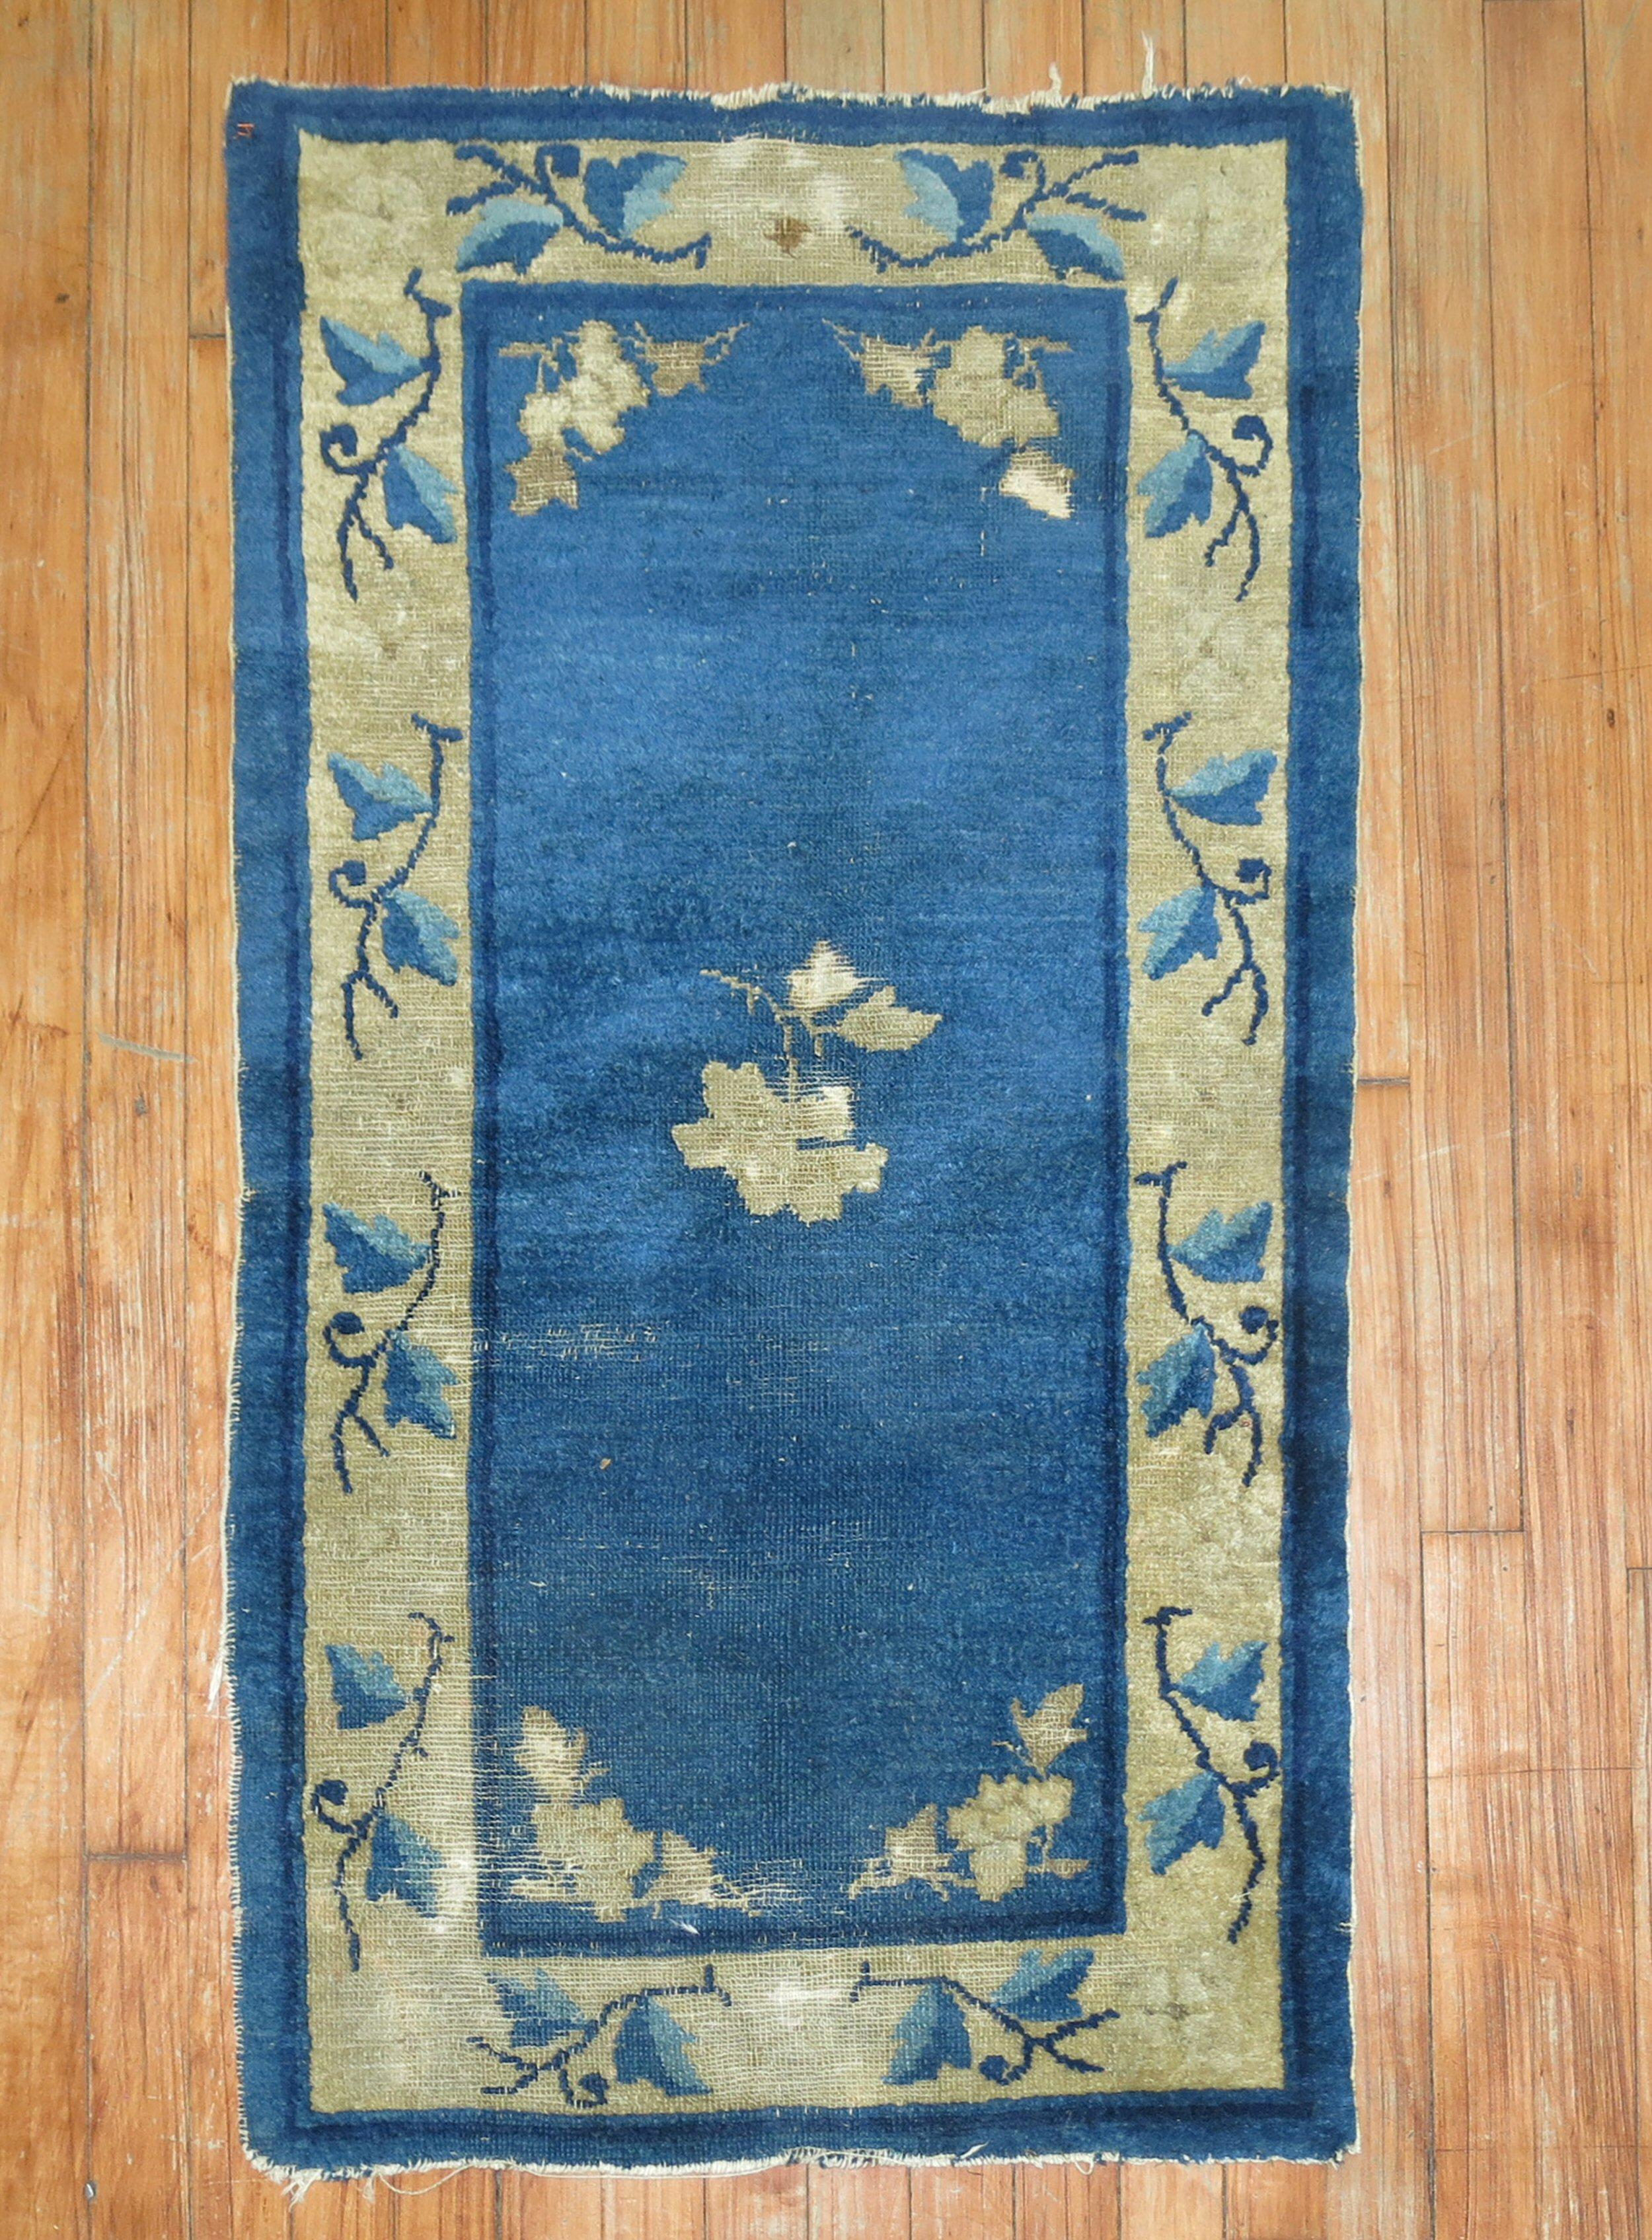 Chinese Nichols art deco mat-size rug from the 2nd quarter of the 20th century. 

Measures: 2'1'' x 3'8